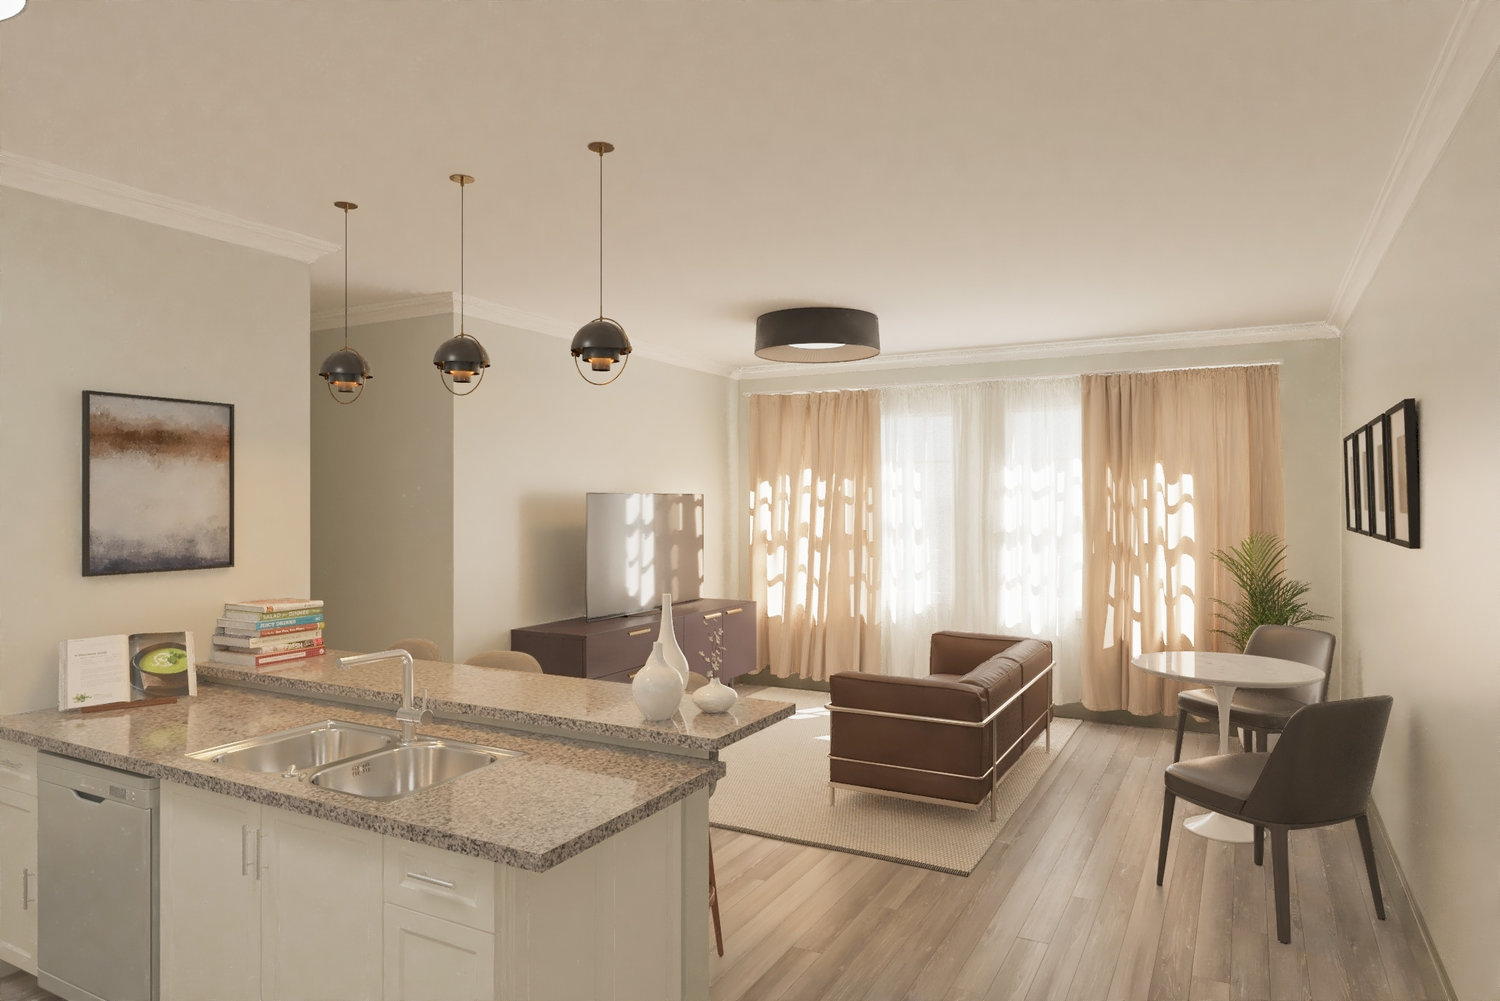 Phase 1 of The Villages at Stoney Creek includes 50 one-, two-, and three-bedroom apartments located next to Turning Stone at significantly below market rates and will be exclusively for new hourly employees relocating to the region. Pictured is a rendering of the apartment interior.